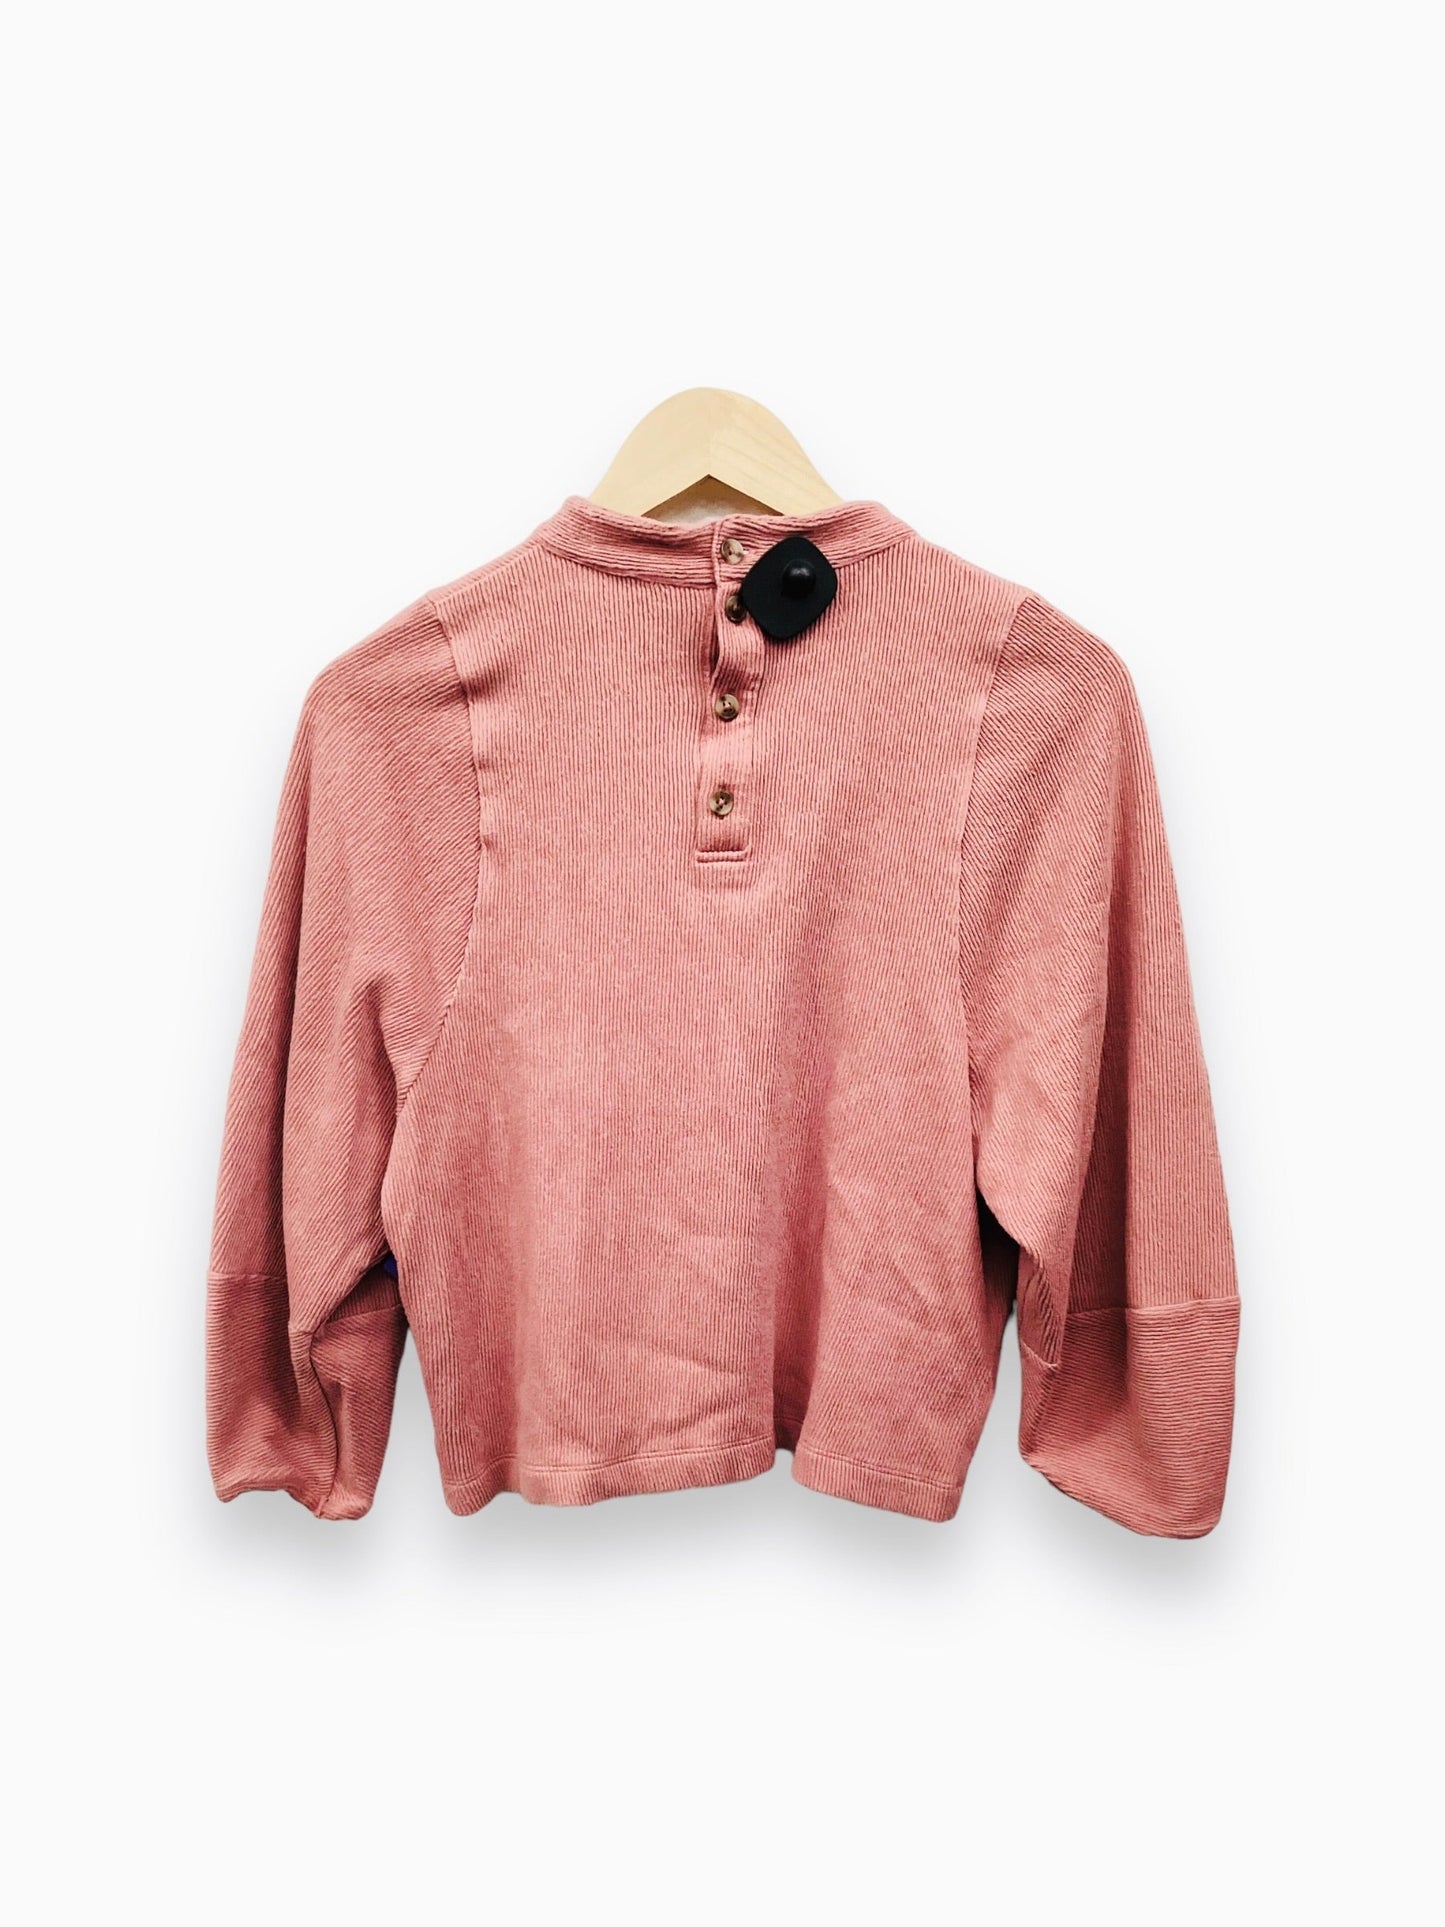 Pink Top Long Sleeve Madewell, Size M